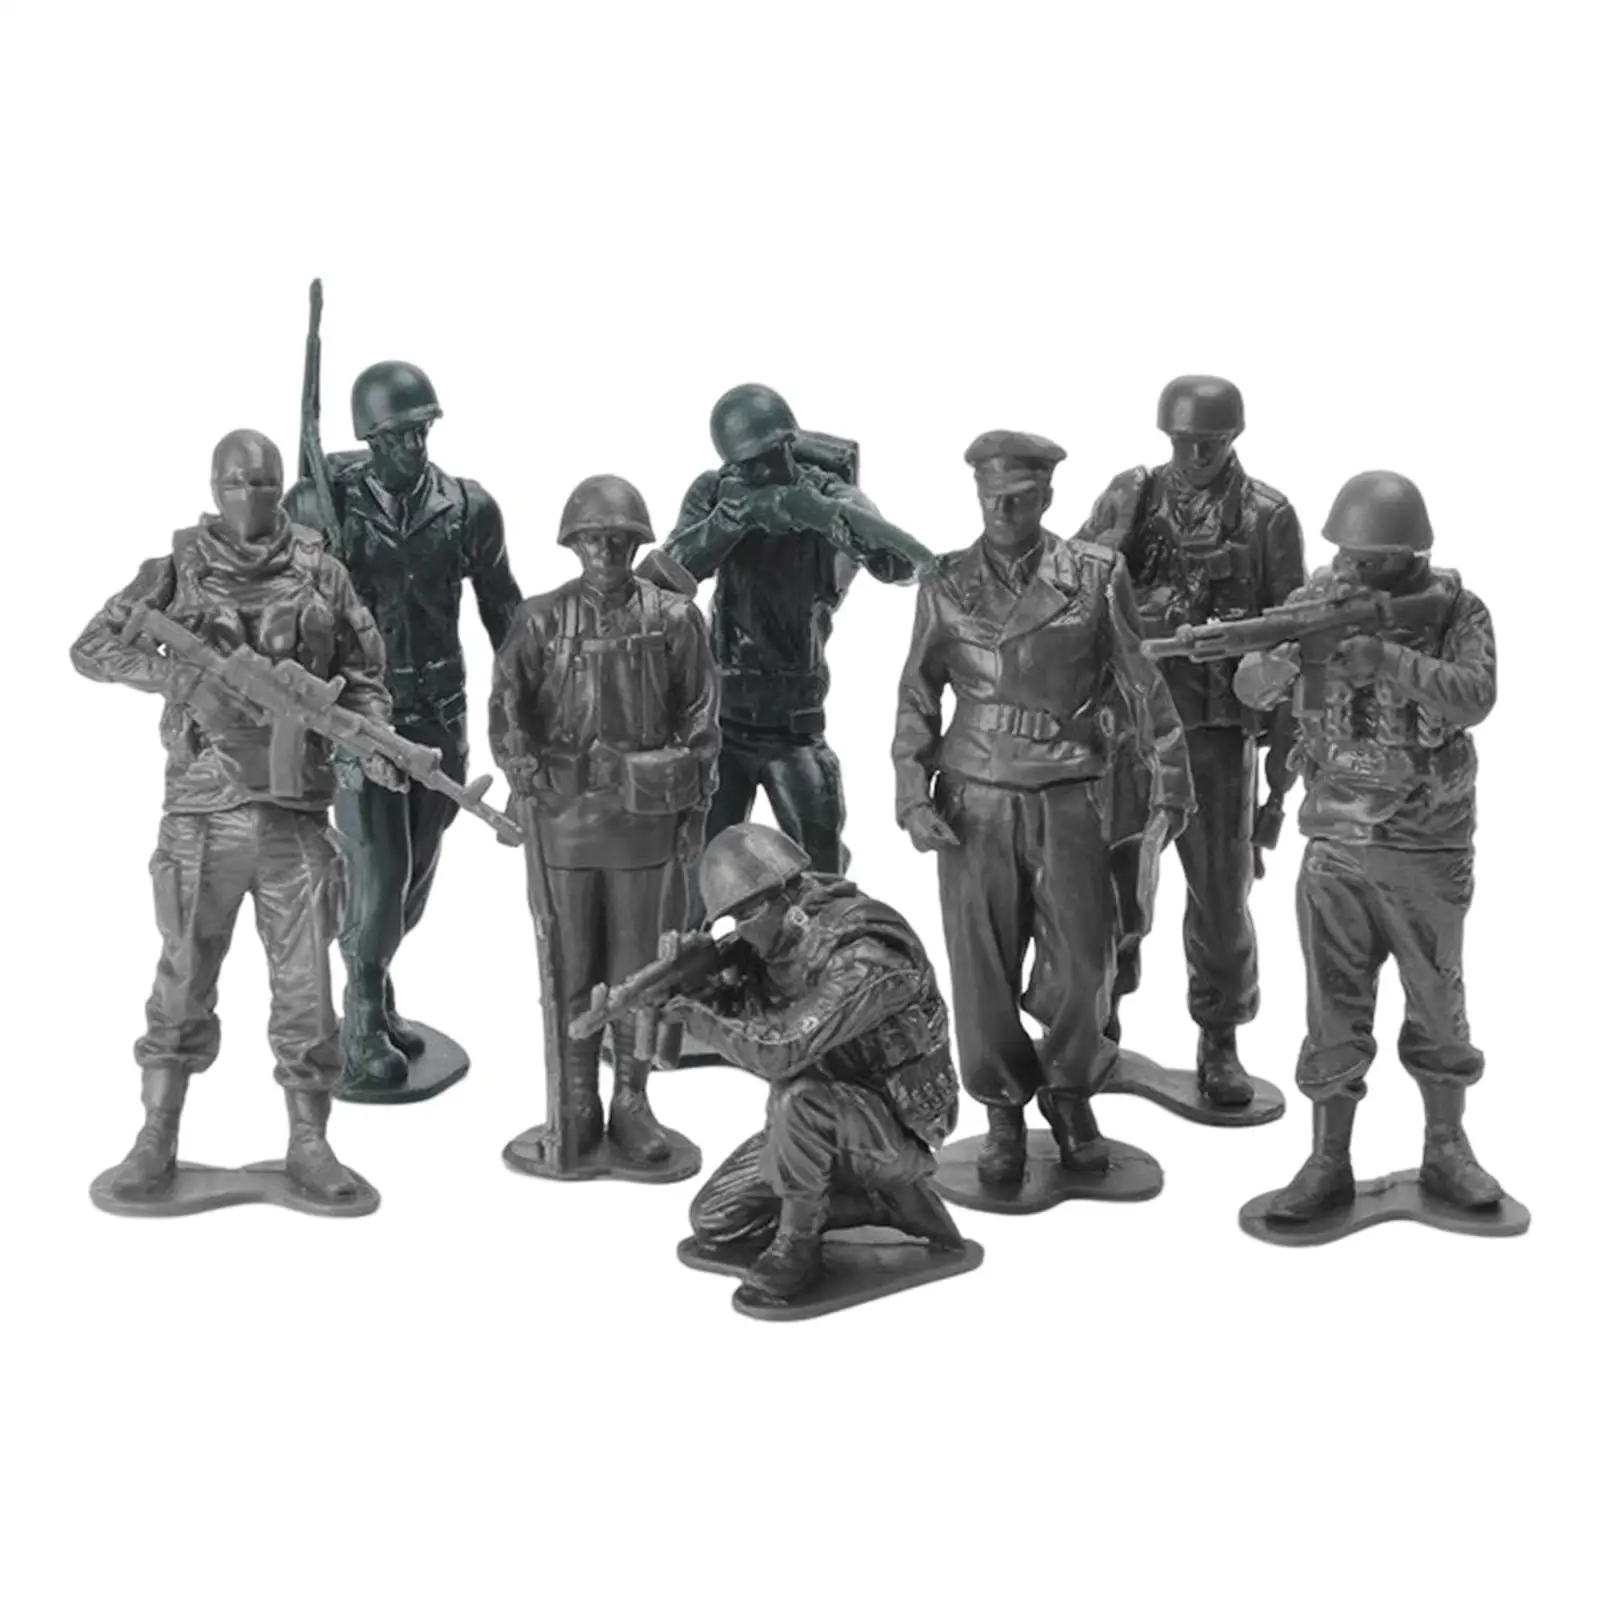 8 Pieces 1:18 Scale Action Figure Toy Soldiers Playset Party Supplies Scenery Layout Soldiers Figurines Model for Children Kids